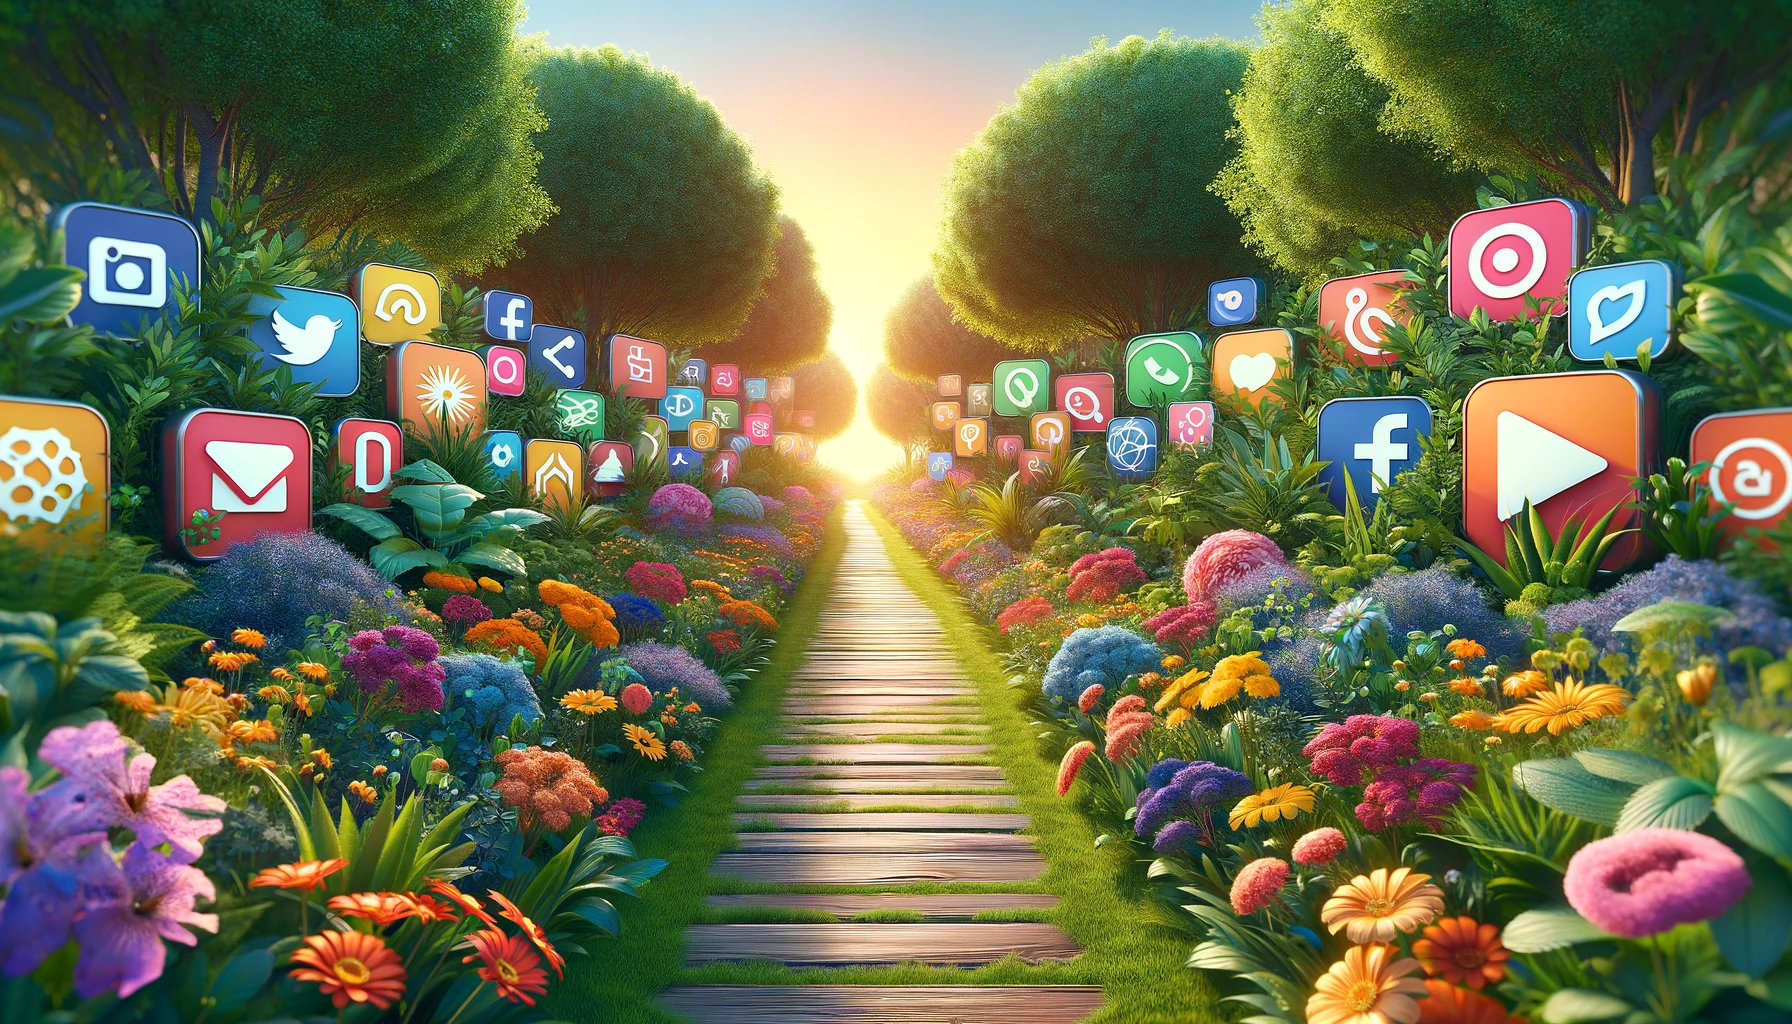 A garden path weaves through vibrant flora, subtly shaped like digital advertising icons, illustrating the seamless blend of content and advertising in native advertising practices.